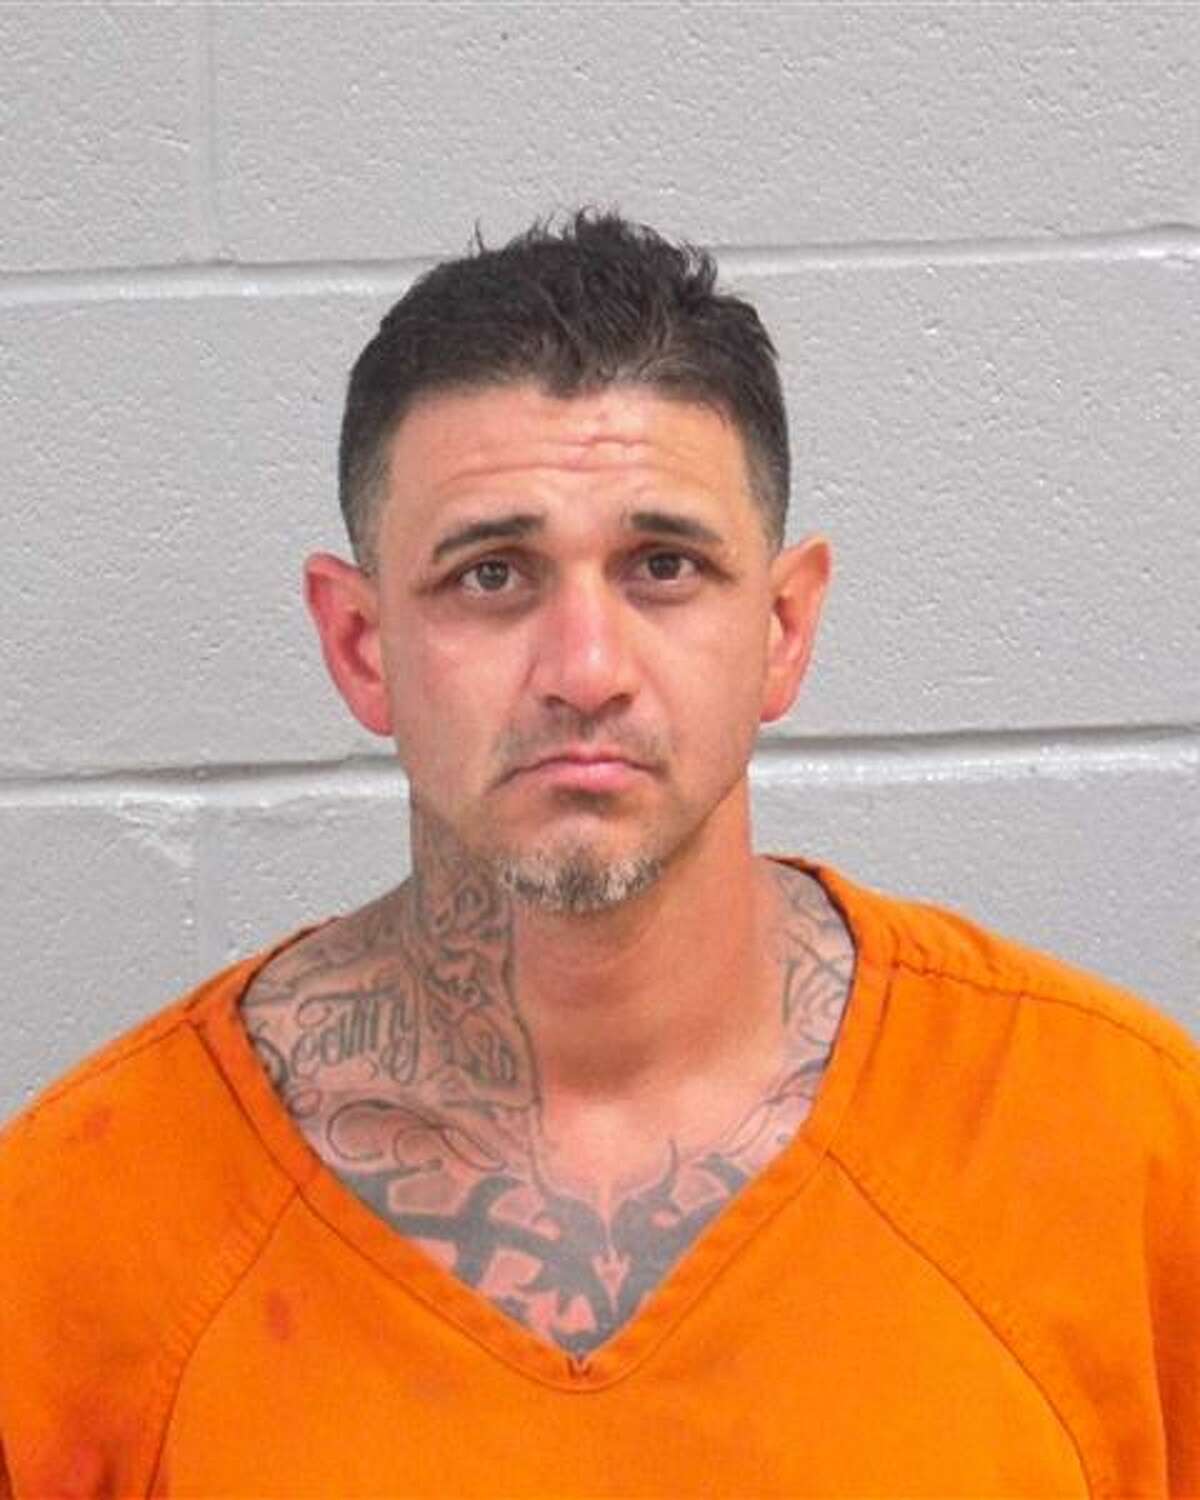 Jesus Manuel Ledesma was being held in Midland County Jail for aggravated assault causing serious bodily injury, a second-degree felony charge. Bond is set at $15,000. 